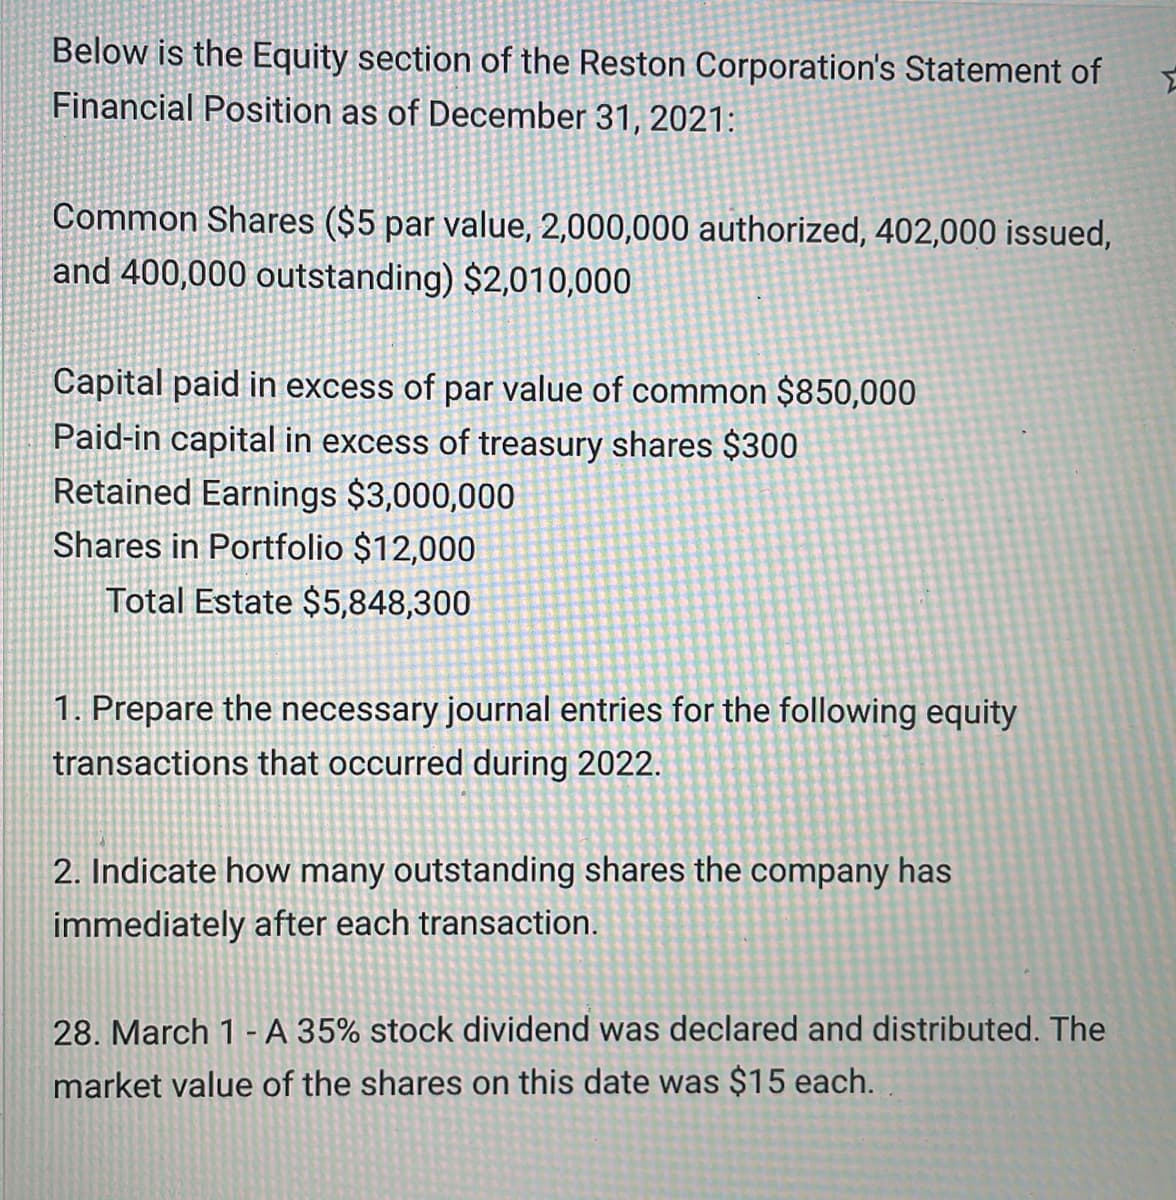 Below is the Equity section of the Reston Corporation's Statement of
Financial Position as of December 31, 2021:
Common Shares ($5 par value, 2,000,000 authorized, 402,000 issued,
and 400,000 outstanding) $2,010,000
Capital paid in excess of par value of common $850,000
Paid-in capital in excess of treasury shares $300
Retained Earnings $3,000,000
Shares in Portfolio $12,000
Total Estate $5,848,300
1. Prepare the necessary journal entries for the following equity
transactions that occurred during 2022.
2. Indicate how many outstanding shares the company has
immediately after each transaction.
28. March 1- A 35% stock dividend was declared and distributed. The
market value of the shares on this date was $15 each.
